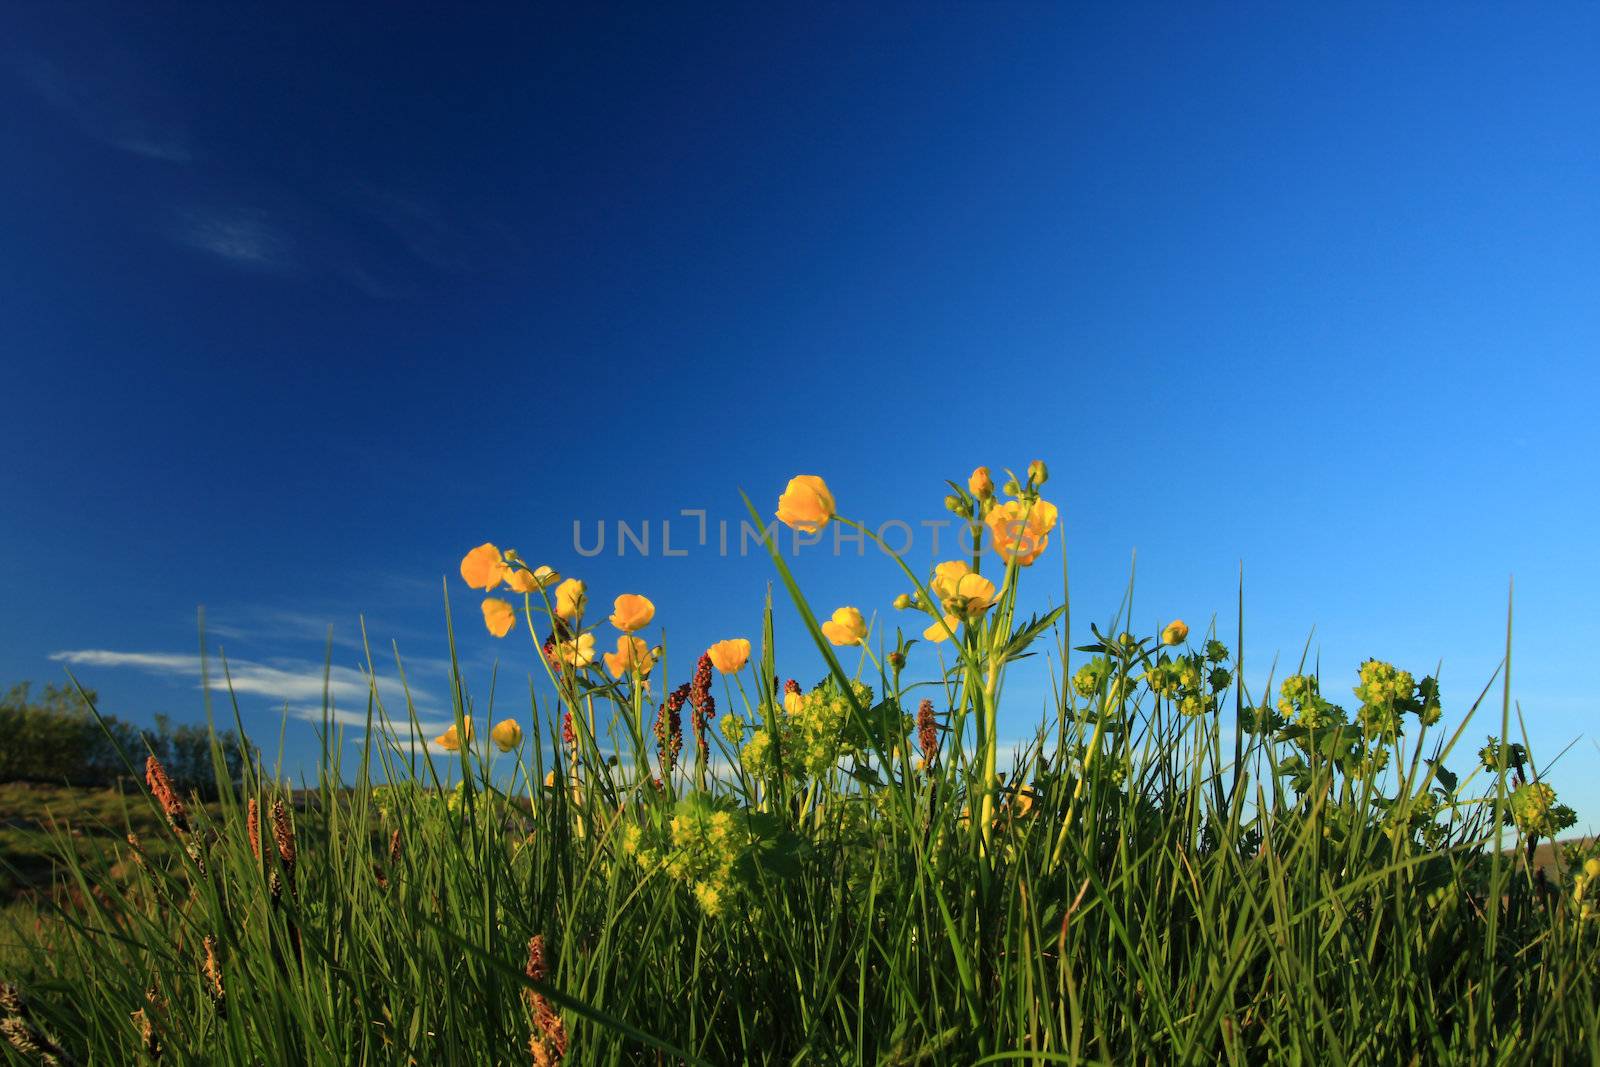 wild yellow flowers against a deep blue sky, intentional minor blurring on some flower caused by breeze. Incredible contrast, 